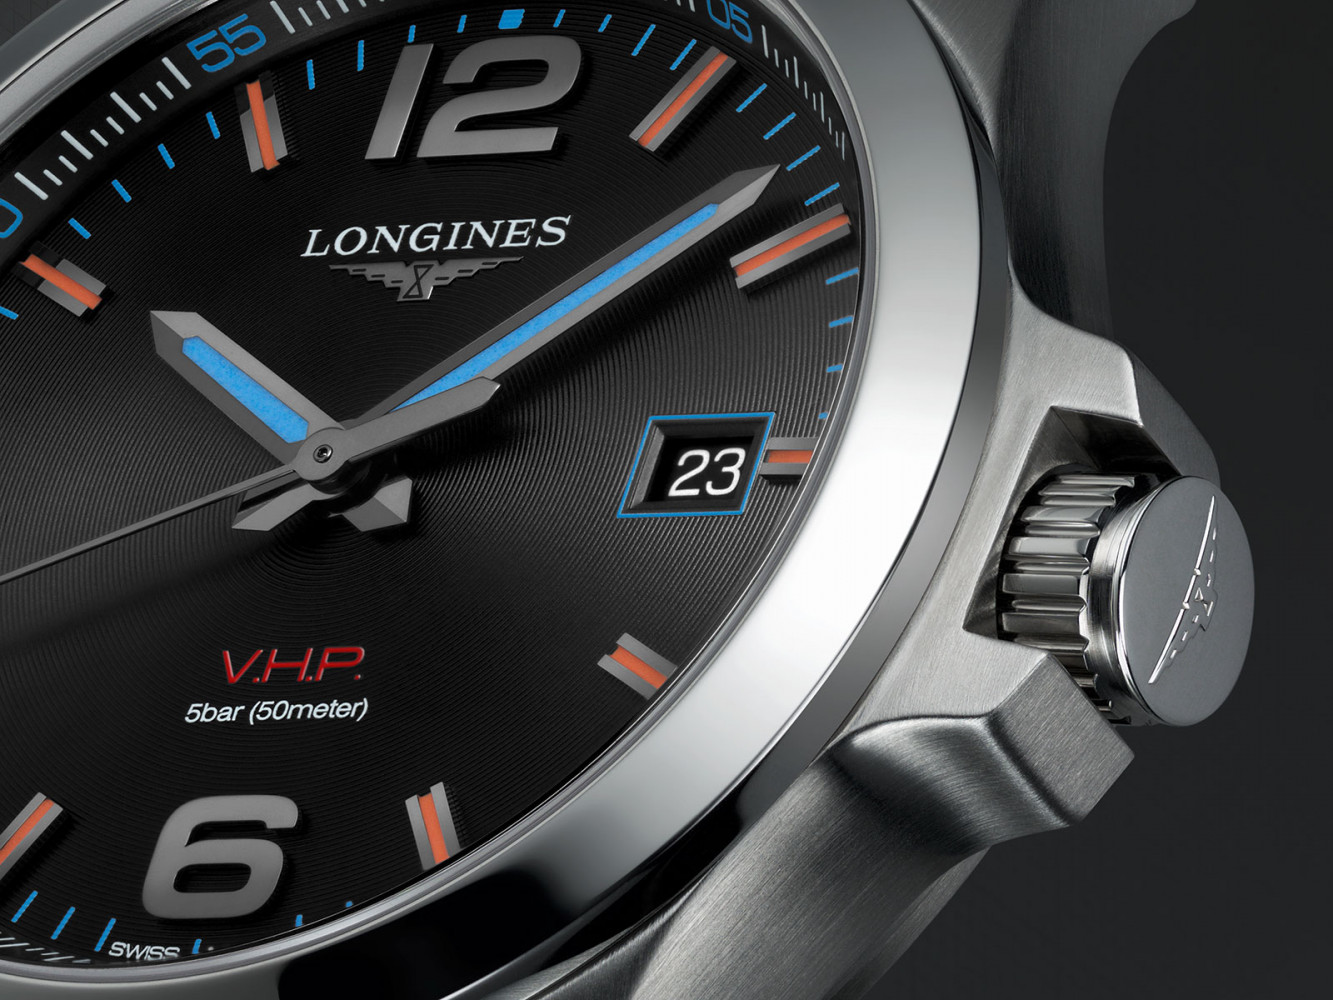 Longines Conquest V.H.P. Gold Coast 2018 Commonwealth Games Edition